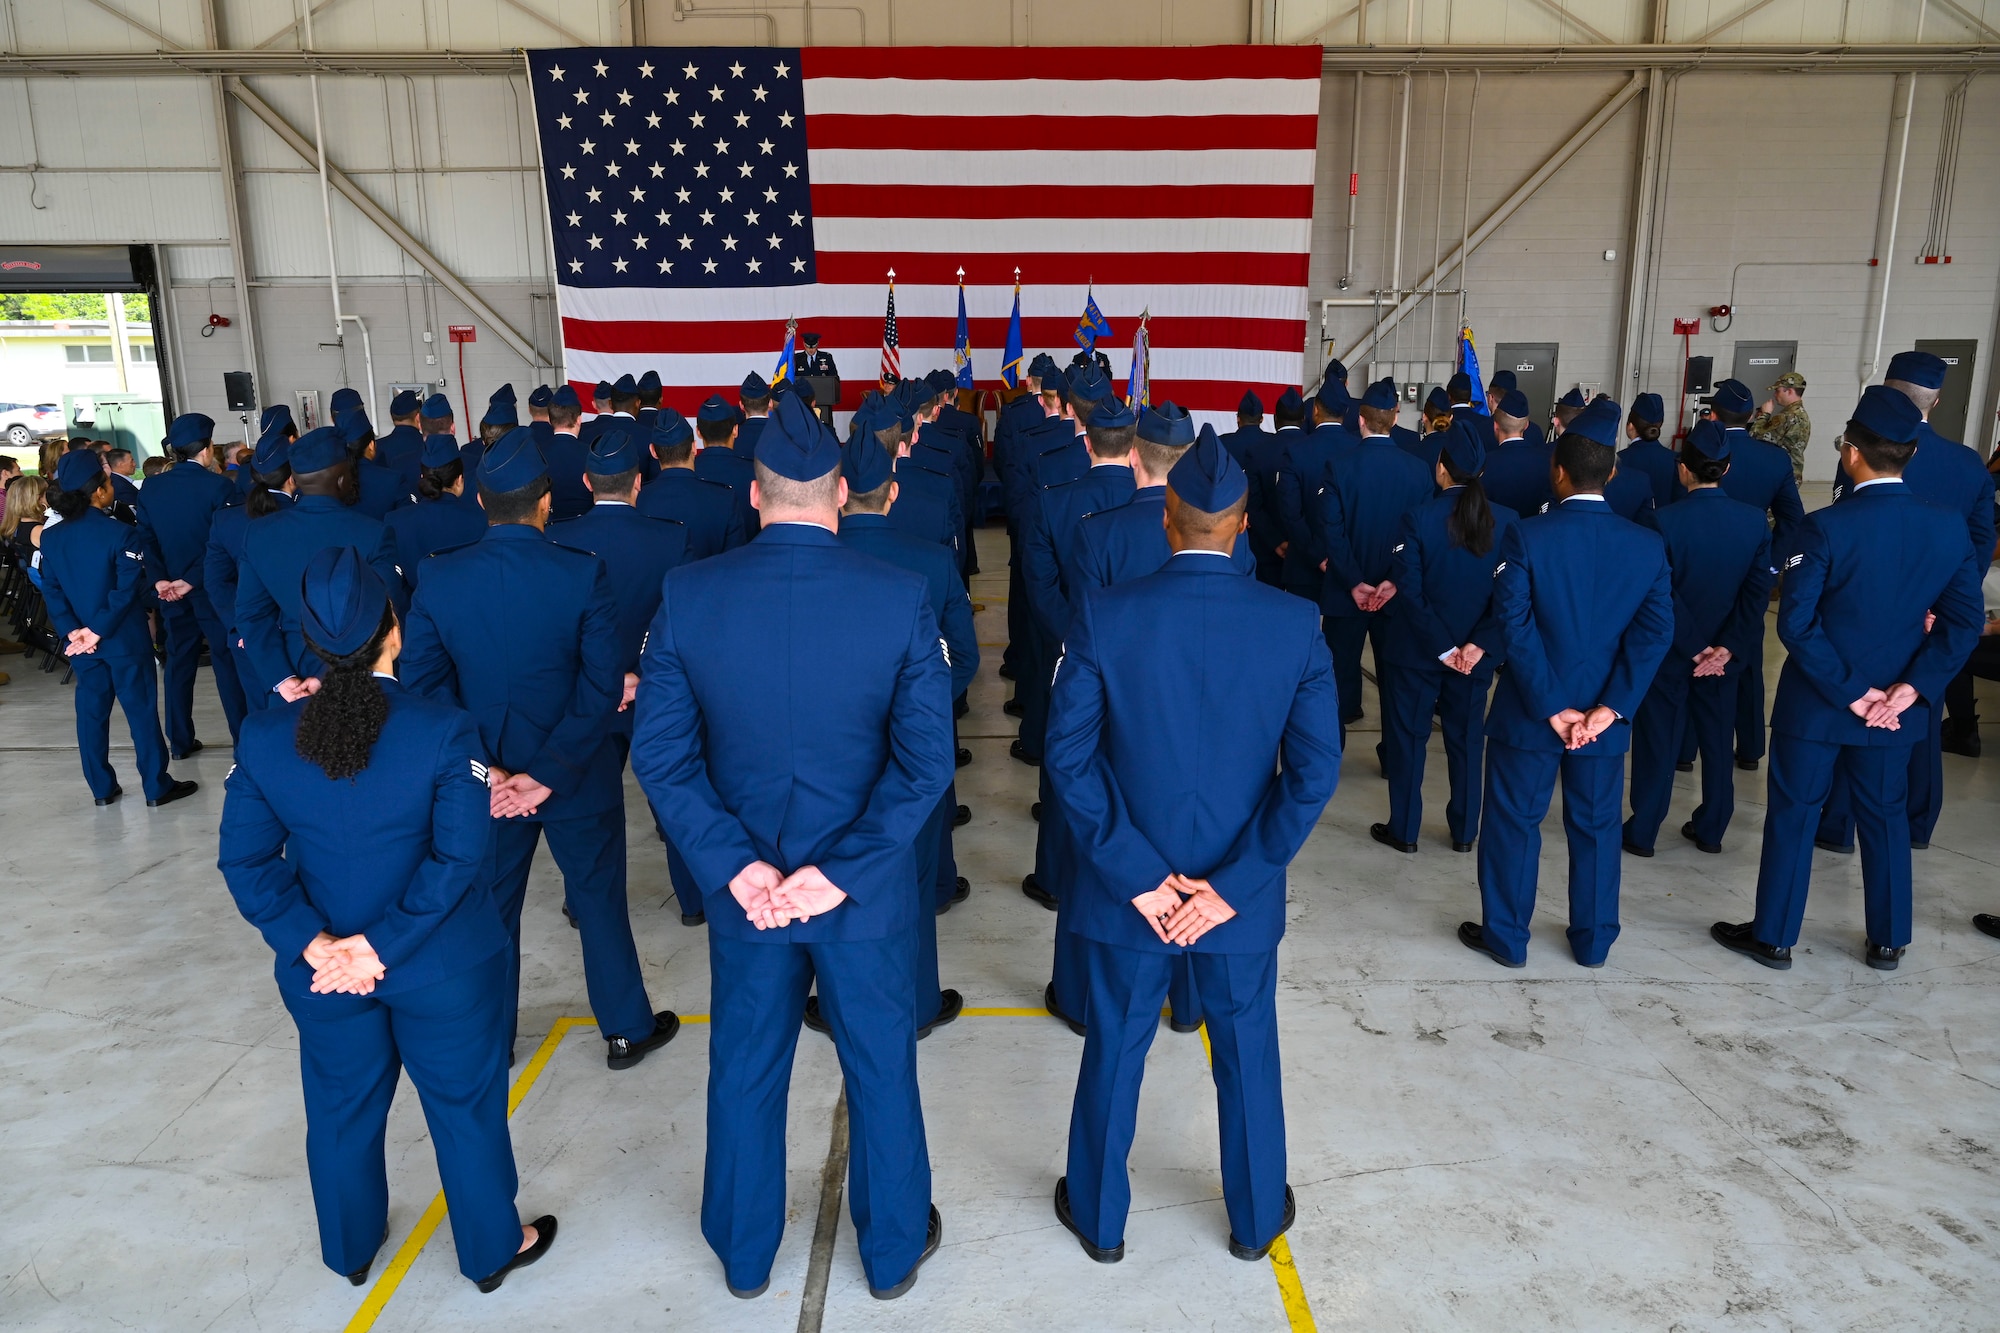 Airmen of the 14th Flying Training Wing, stand at ease in formation during the 14FTW Change of Command ceremony on Columbus Air Force Base, Miss., July 22, 2022. The wing is composed of 244 aircraft flying more than 55,000 sorties and 77,000 hours per year while training over 400 pilots and combat system operators annually.( U.S. Air Force Senior Airman Jessica Haynie)